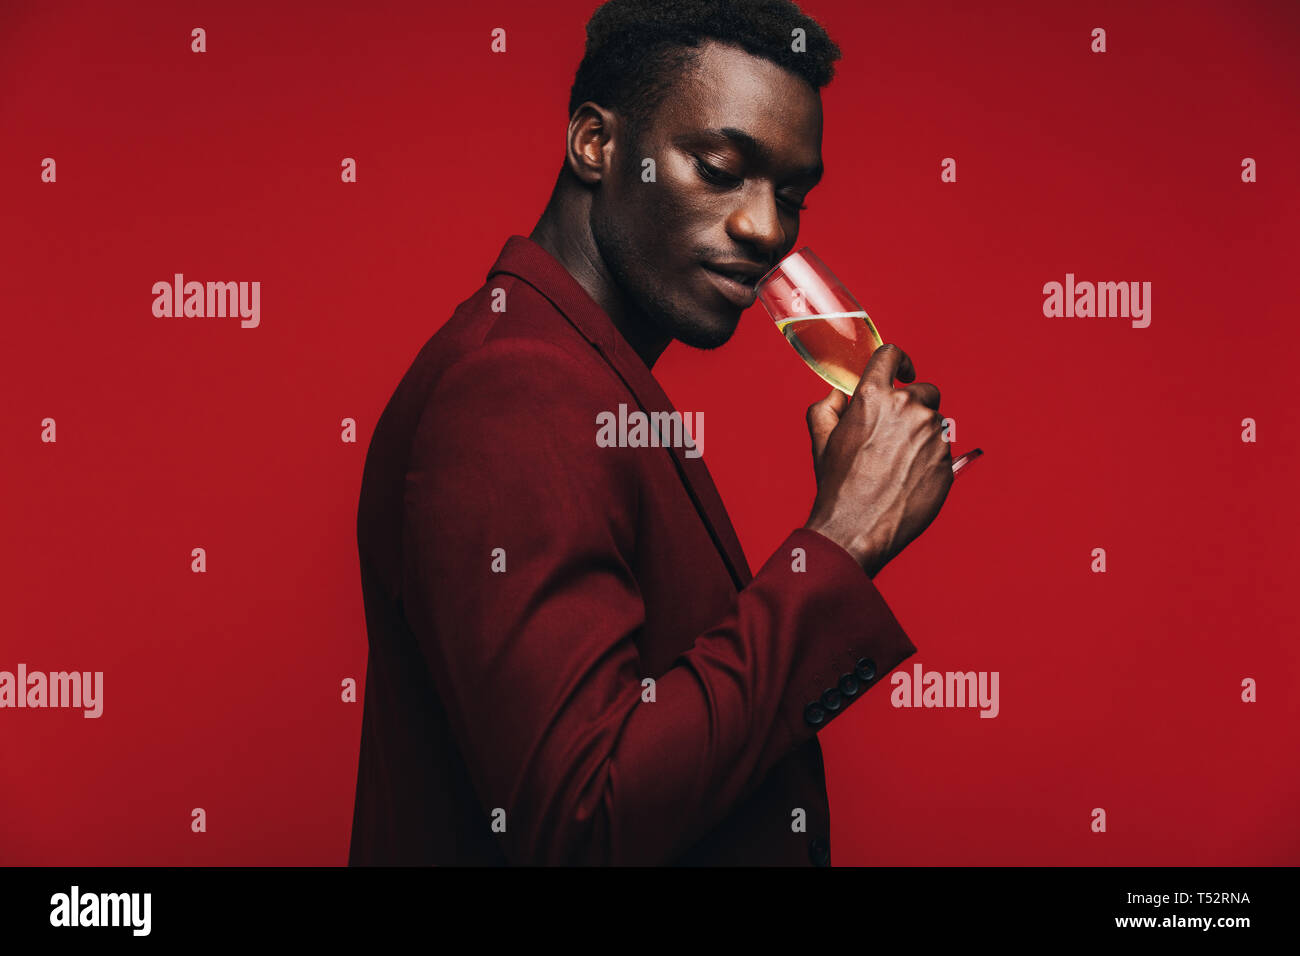 Good looking african guy drinking champagne against red background. Sophisticated african man having a glass if champagne. Stock Photo